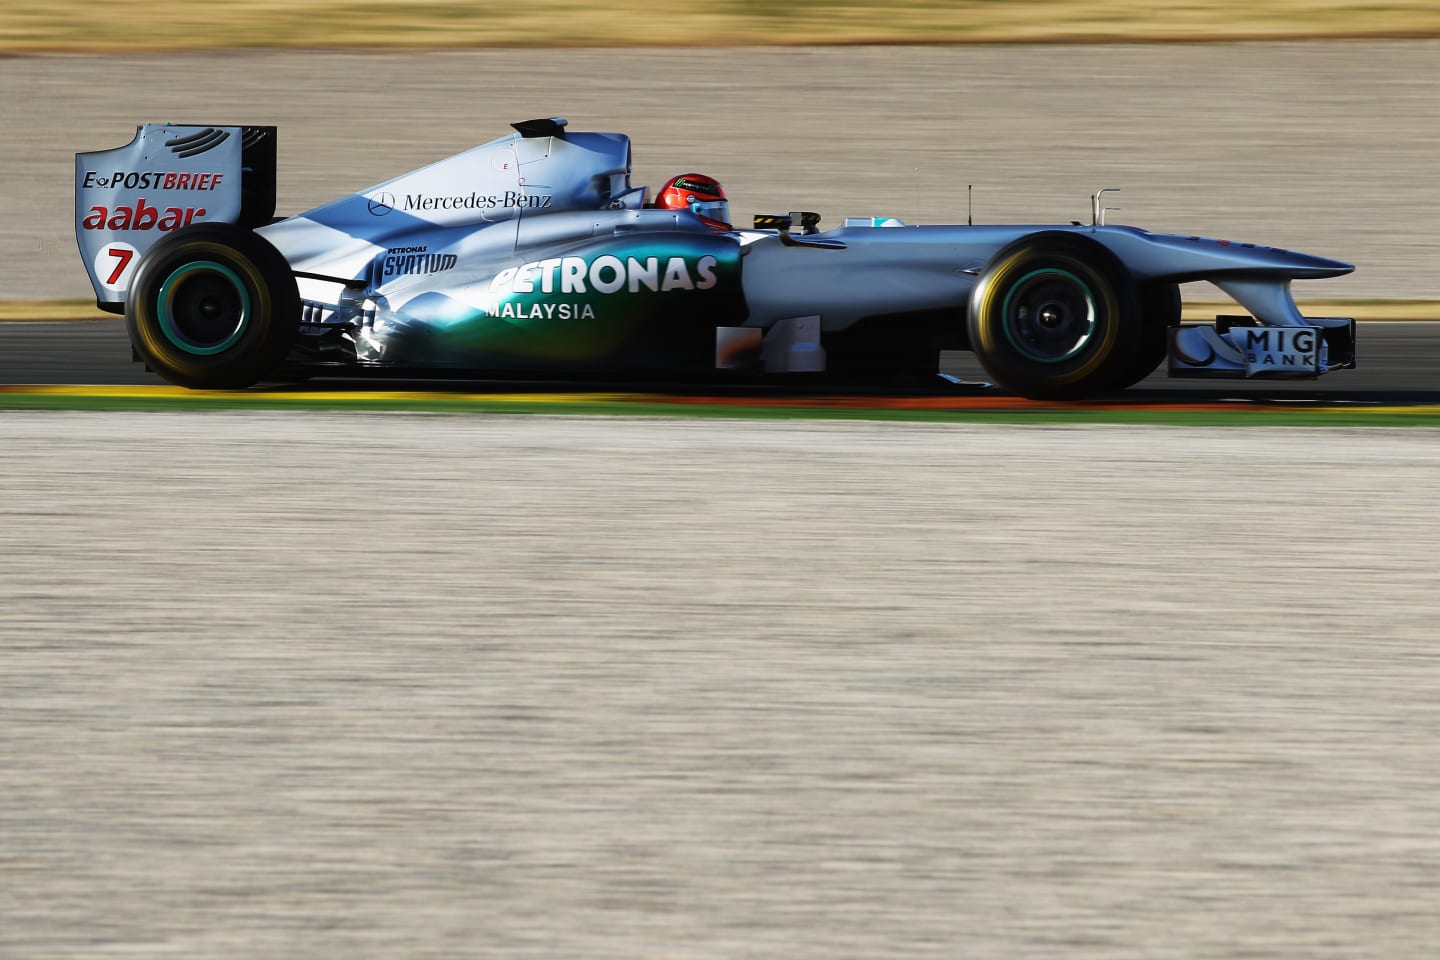 2011: A bigger splash of green was added to the dominant silver in 2011, in deference to title sponsor Petronas. It was a second winless year, but the team did finish fourth in the championship.